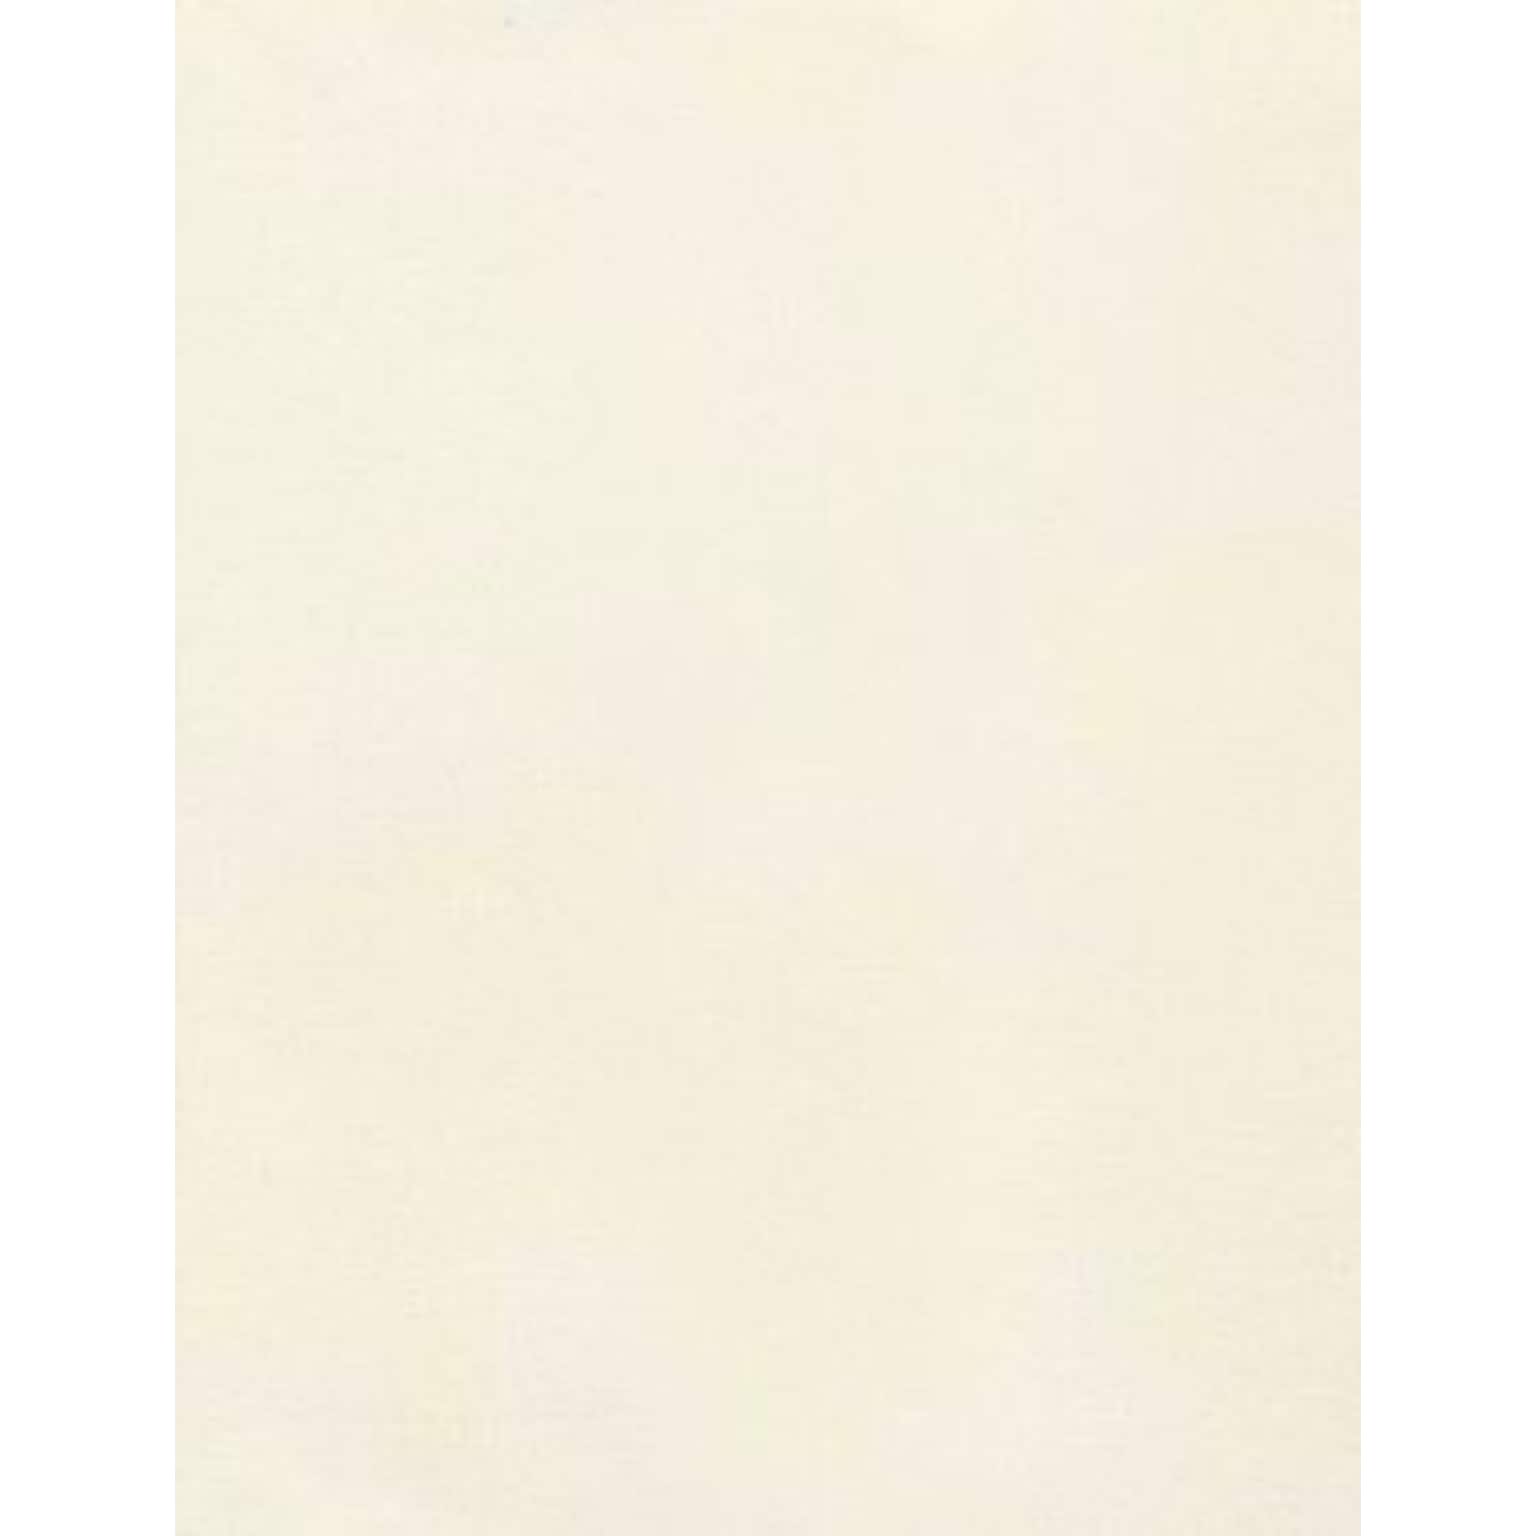 LUX Colored Paper, 32 lbs., 11 x 17, Natural Linen, 500 Sheets/Pack (1117-P-NLI-500)